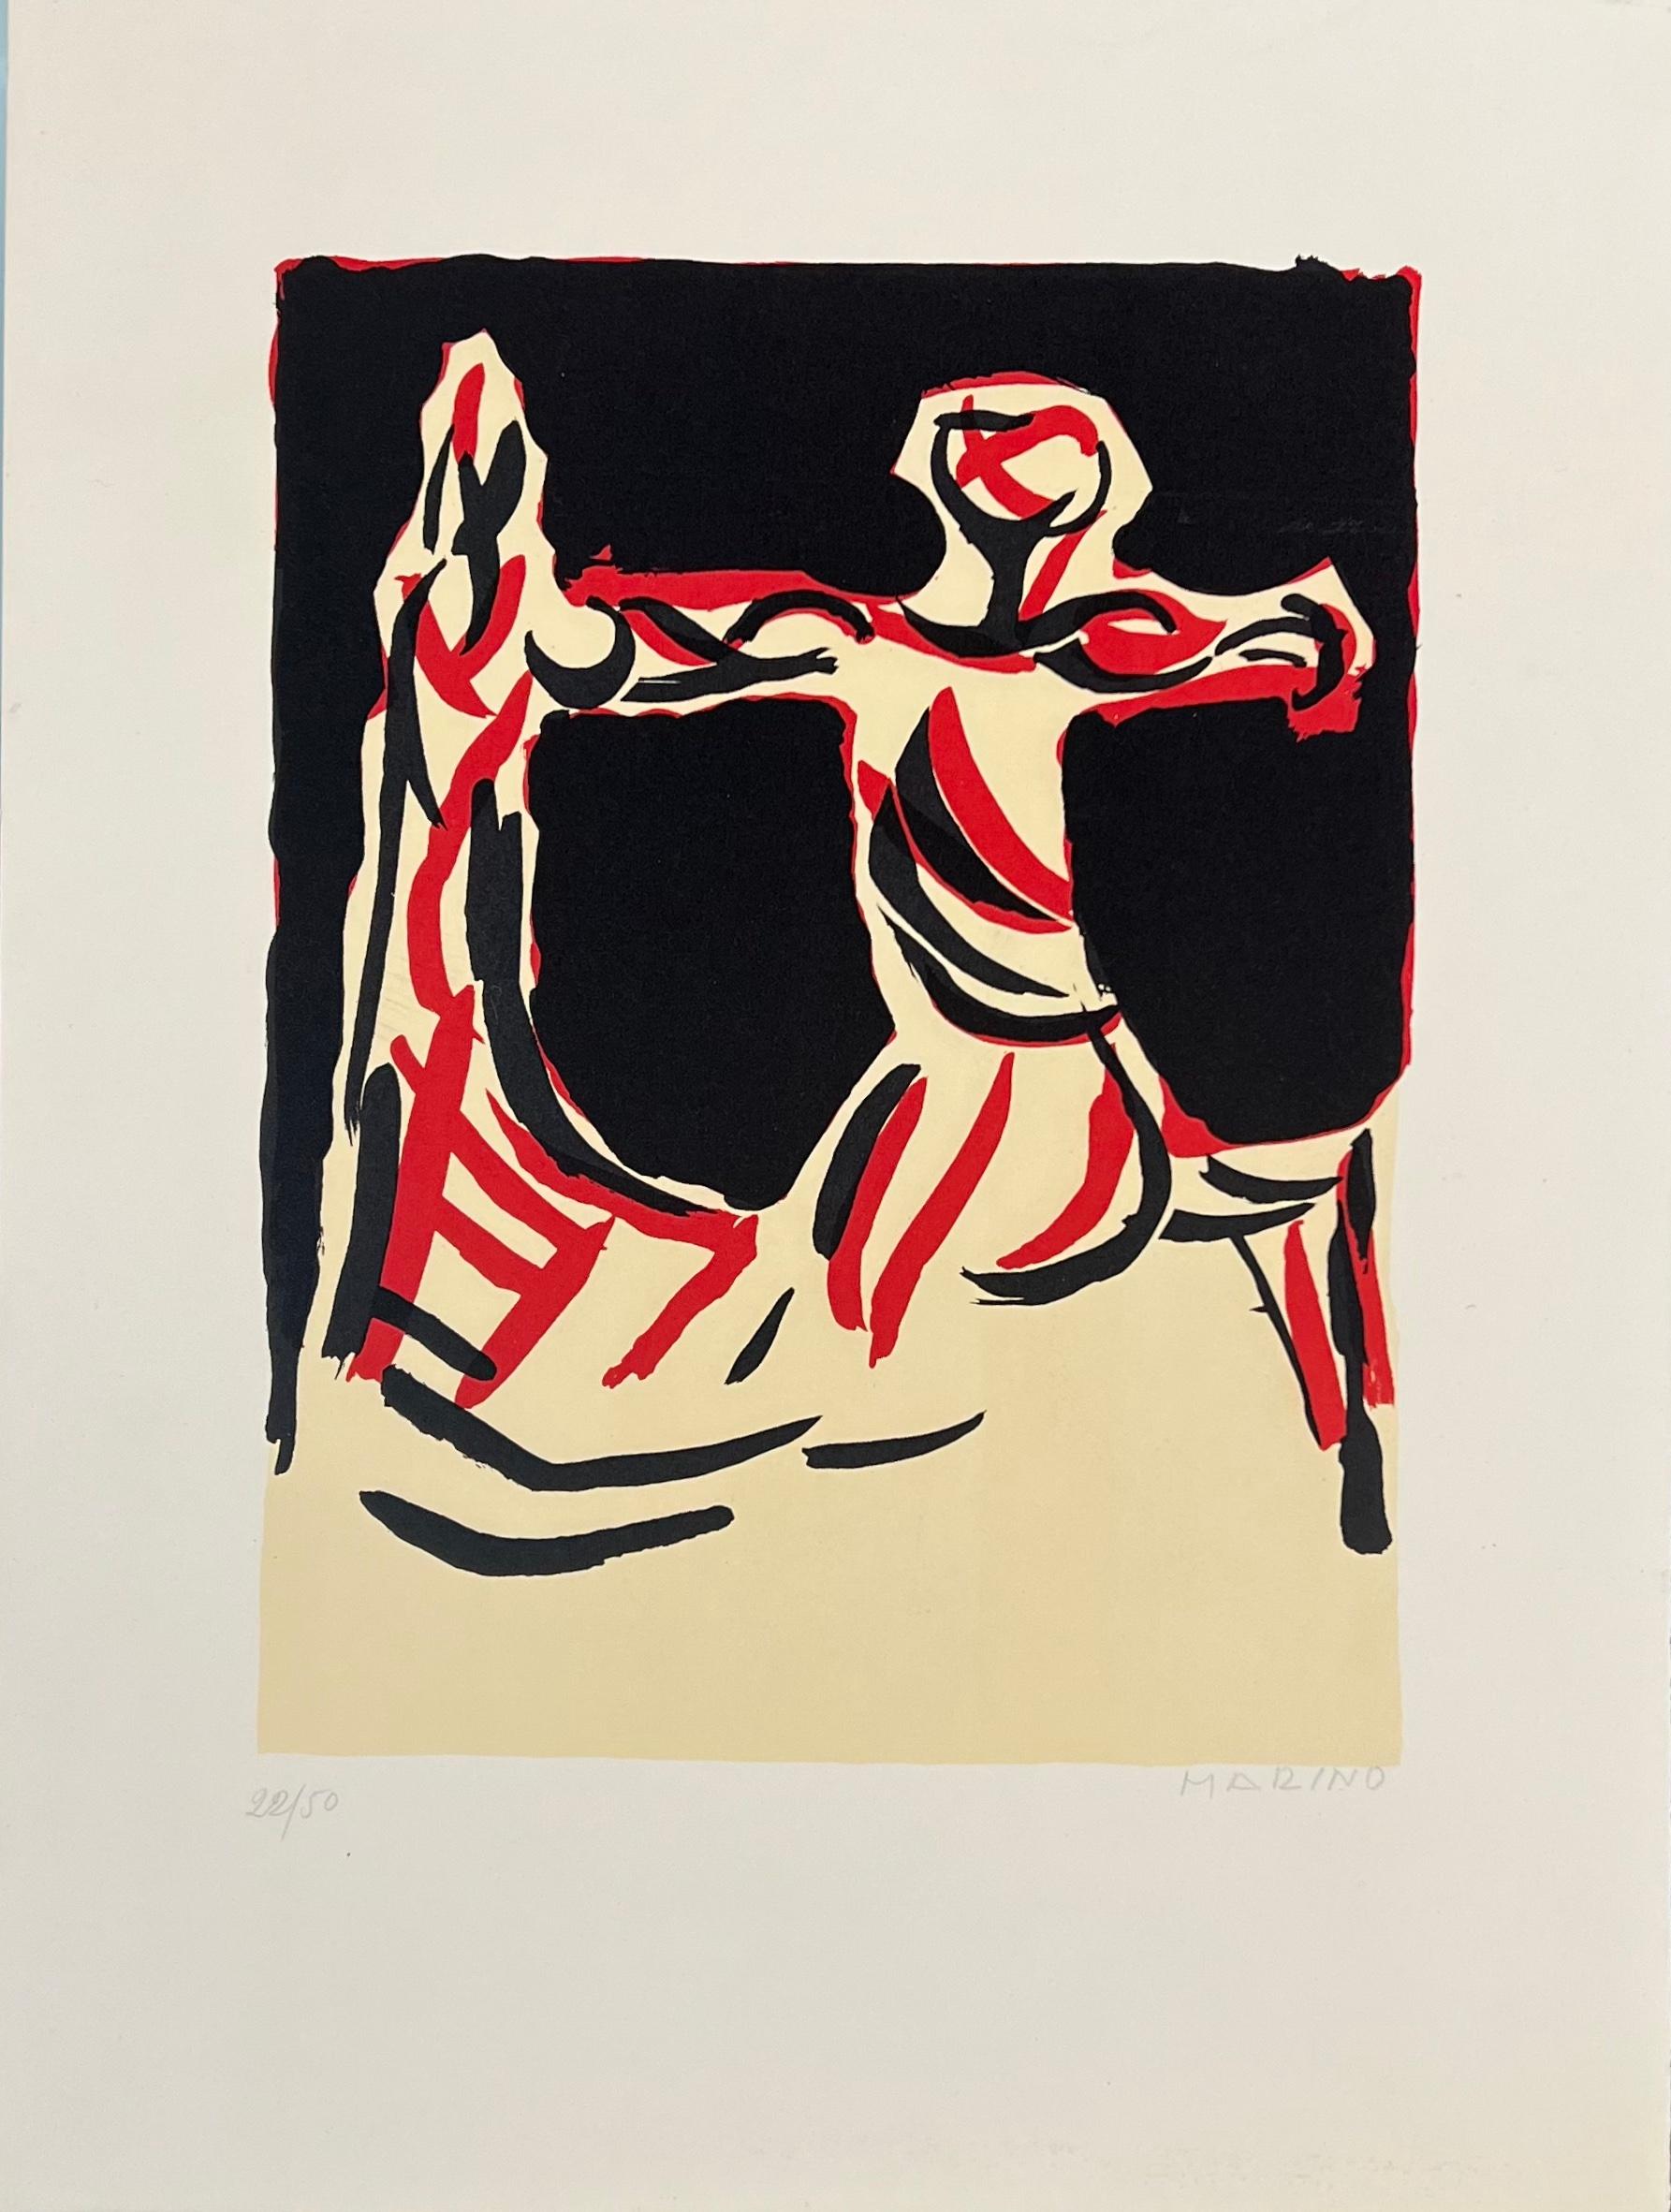 Marino Marini, "Chevalier" (Knight), 1970, lithograph, hand signed, numbered